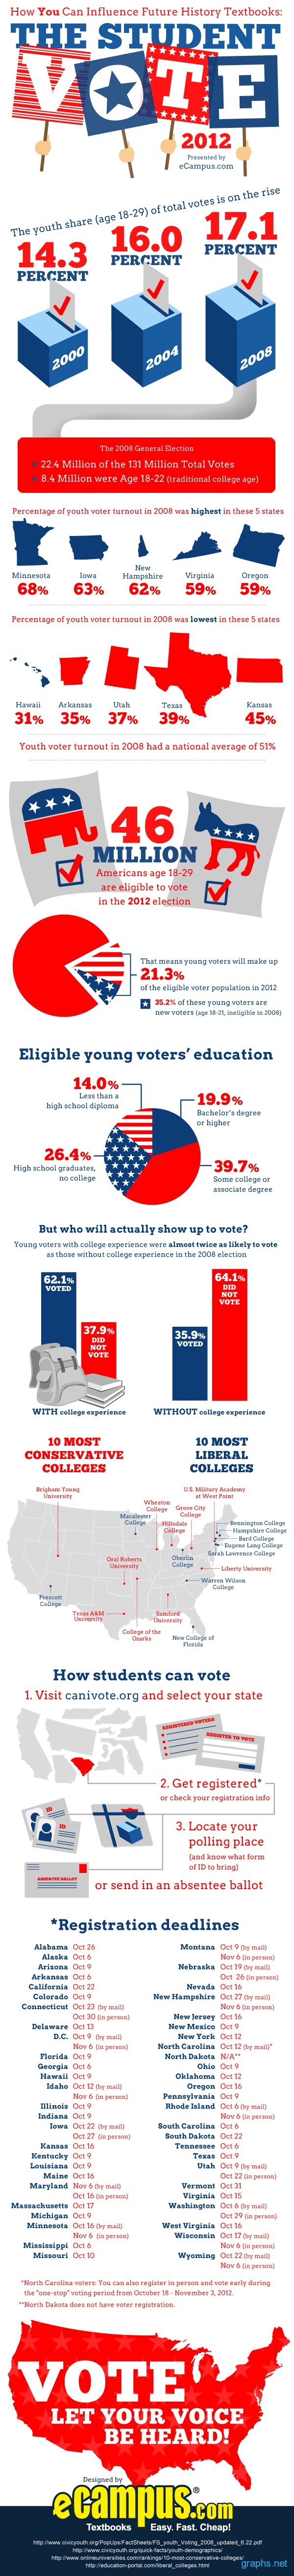 Student Voters United States